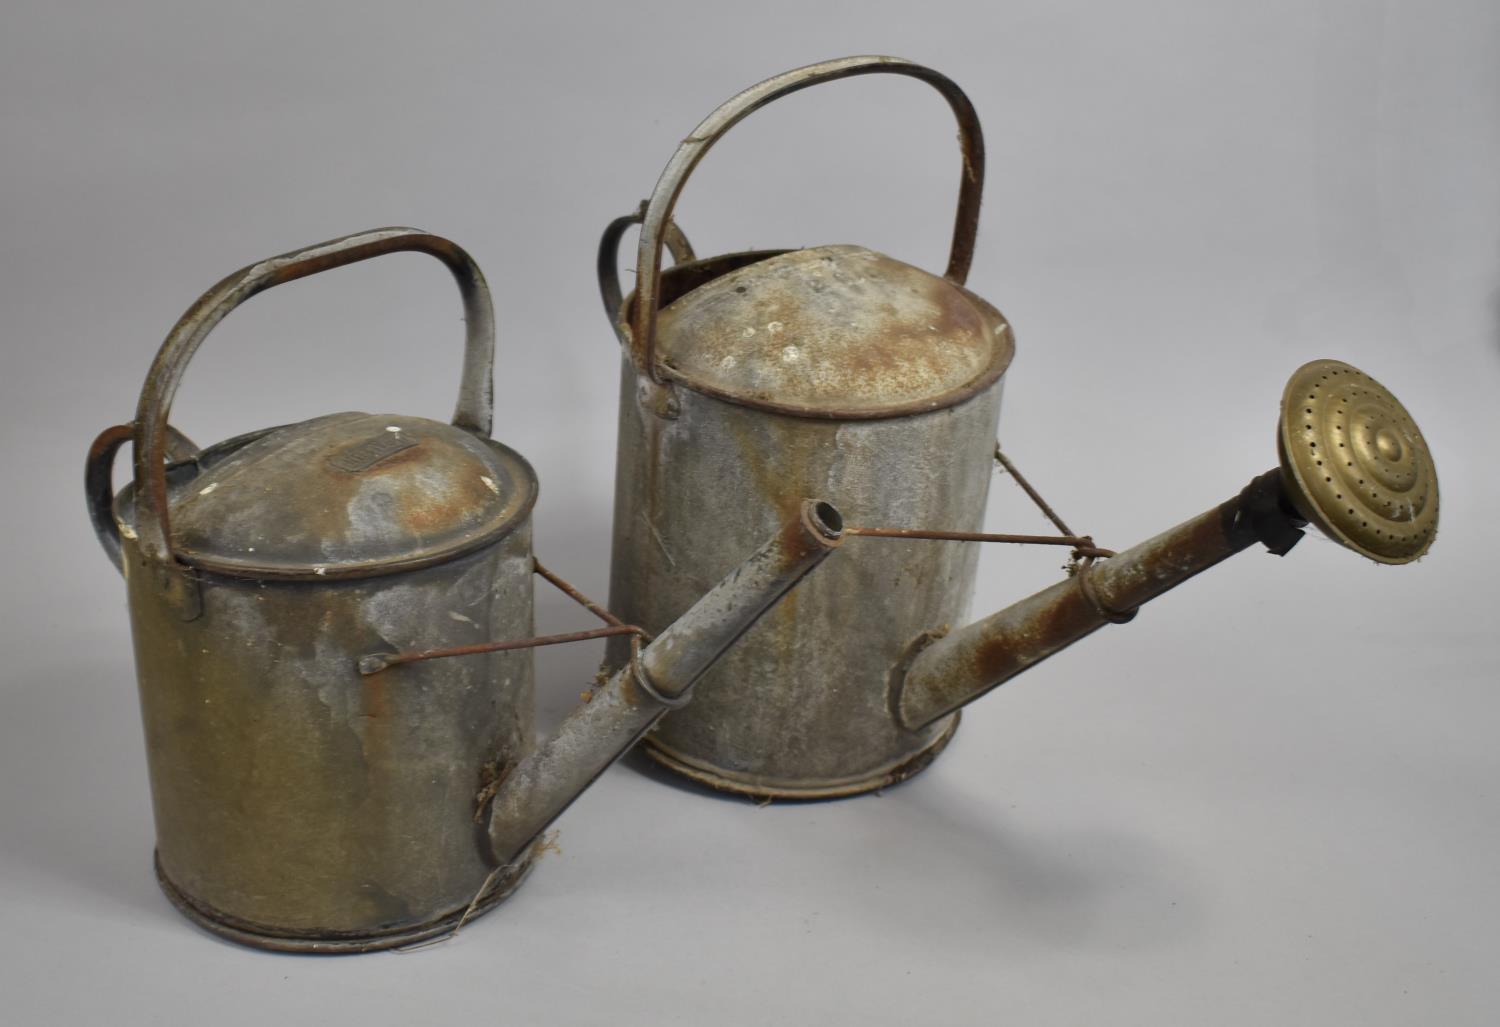 Two Vintage Galvanized Iron Watering Cans